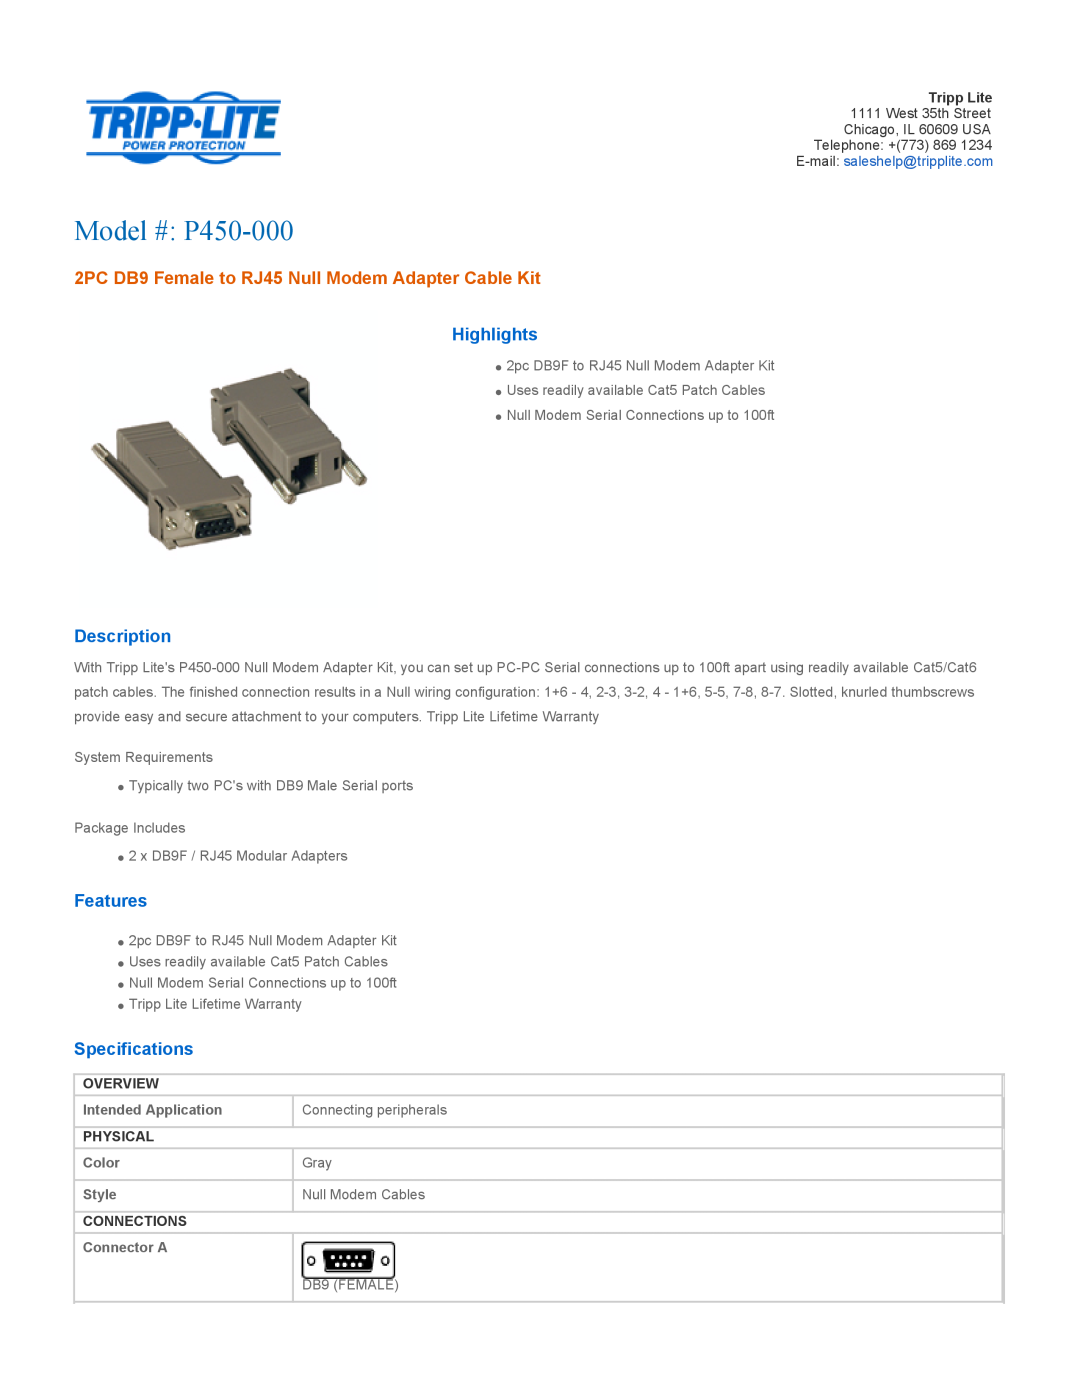 Tripp Lite P450-000 specifications Highlights, Description, Features, Specifications, Overview, Intended Application, Gray 